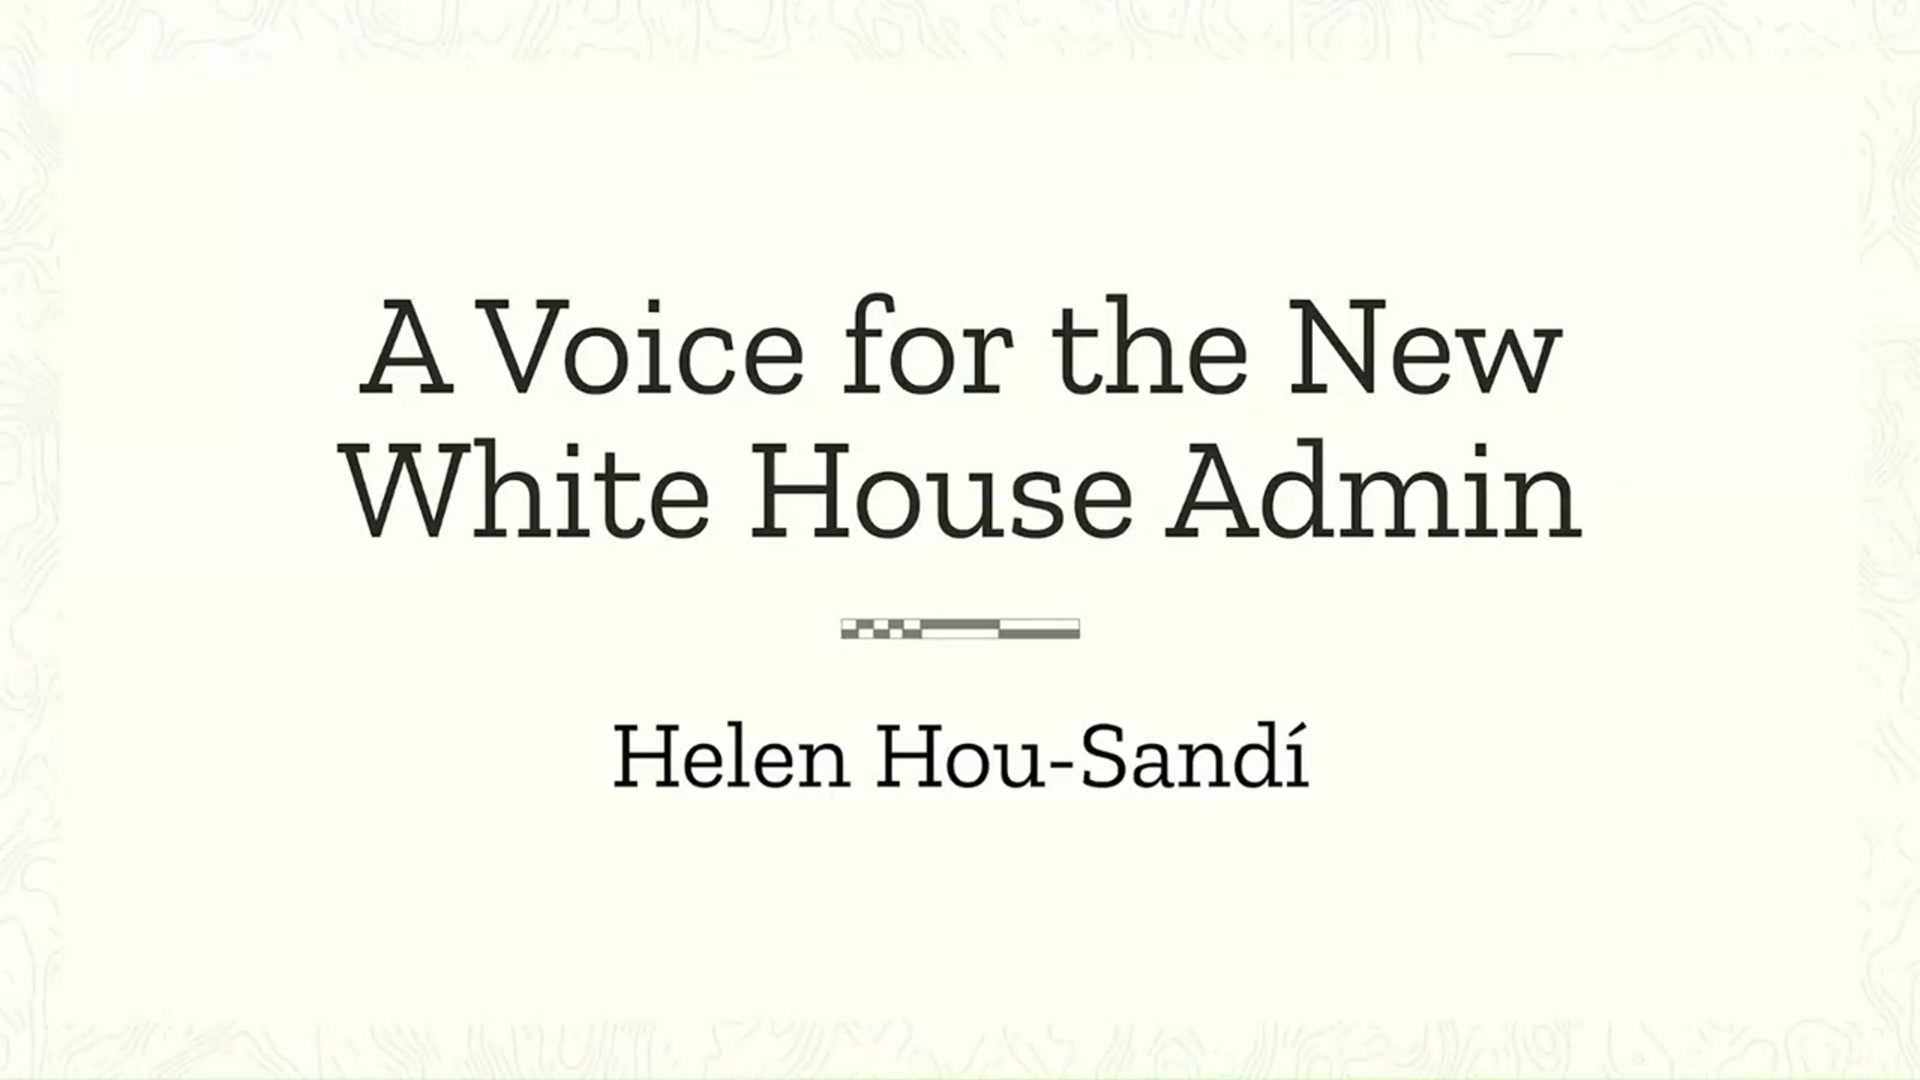 Helen Hou-Sandi: A voice for the new White House administration with the block editor